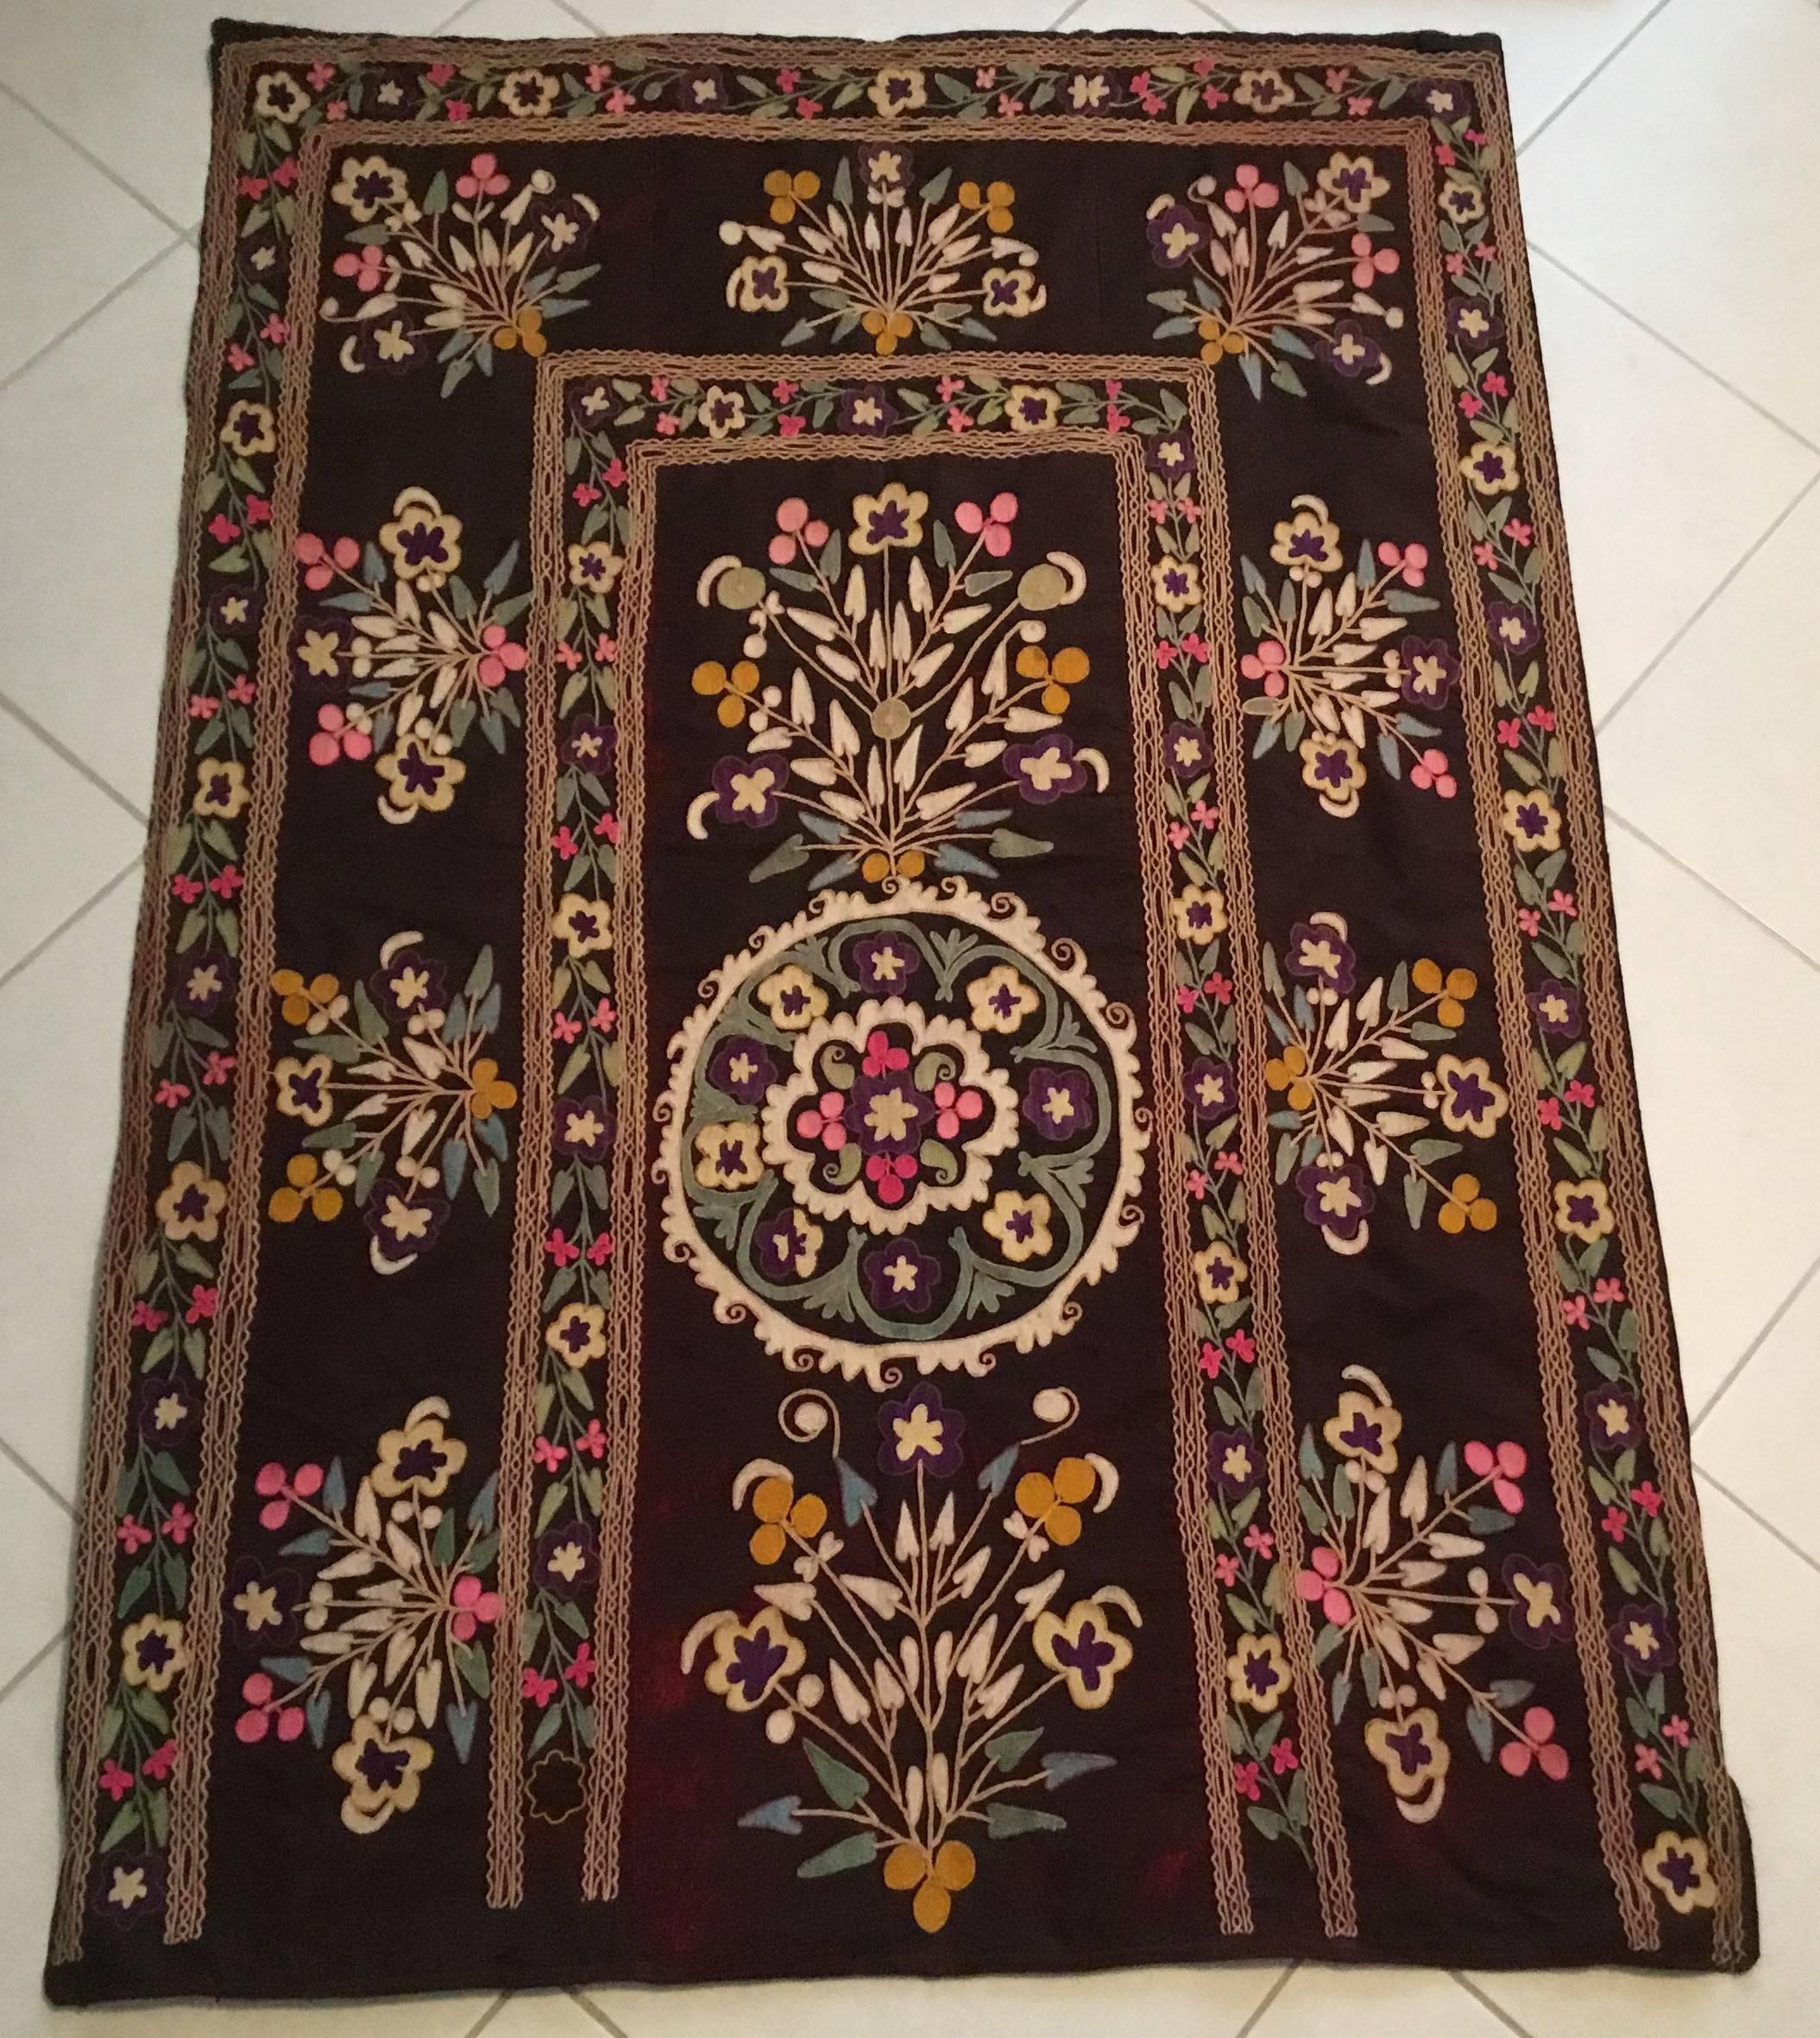 Beautiful Suzani textile made of exceptional hand embroidery of vine and flowers on a muted wine color velvet background.
The velvet background partially oxidized due to the age, but still strong and firm. The Suzani also has full cotton